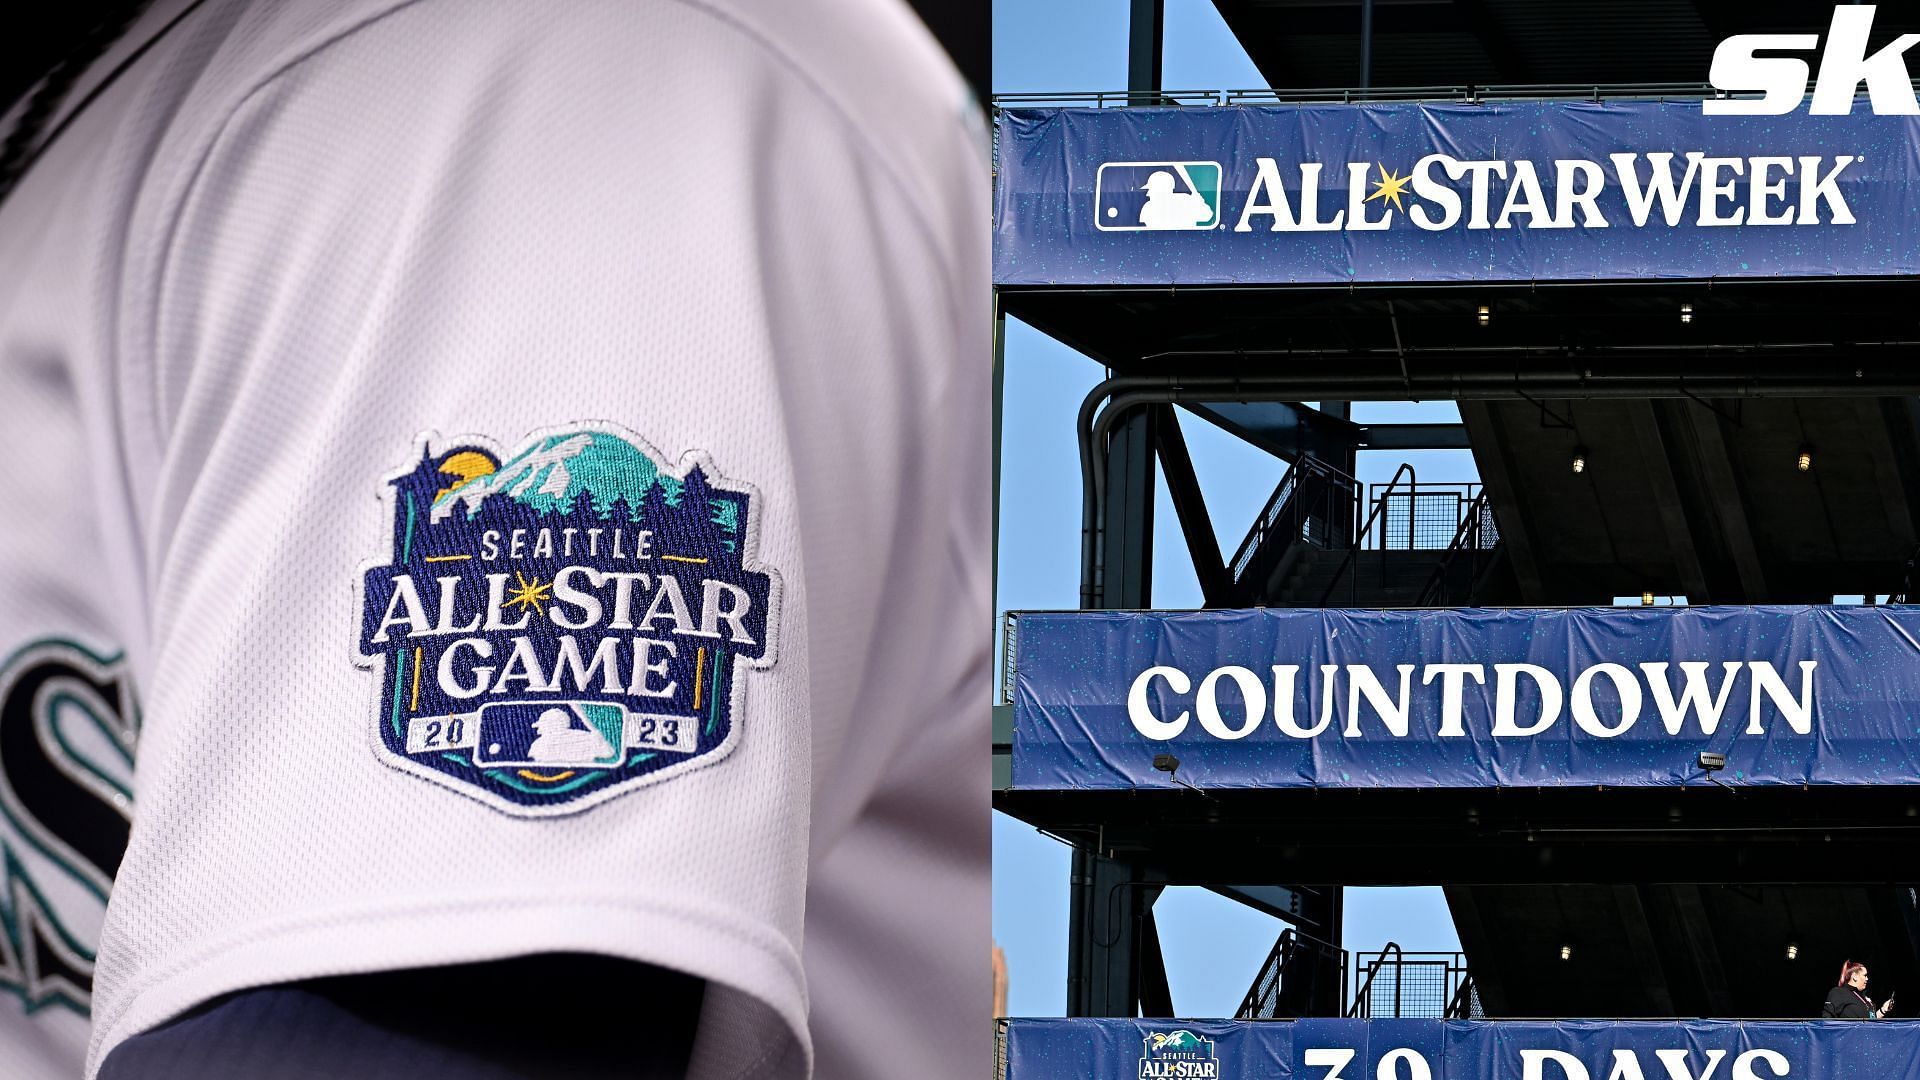 2022 MLB All-Star Game jerseys revealed by Nike